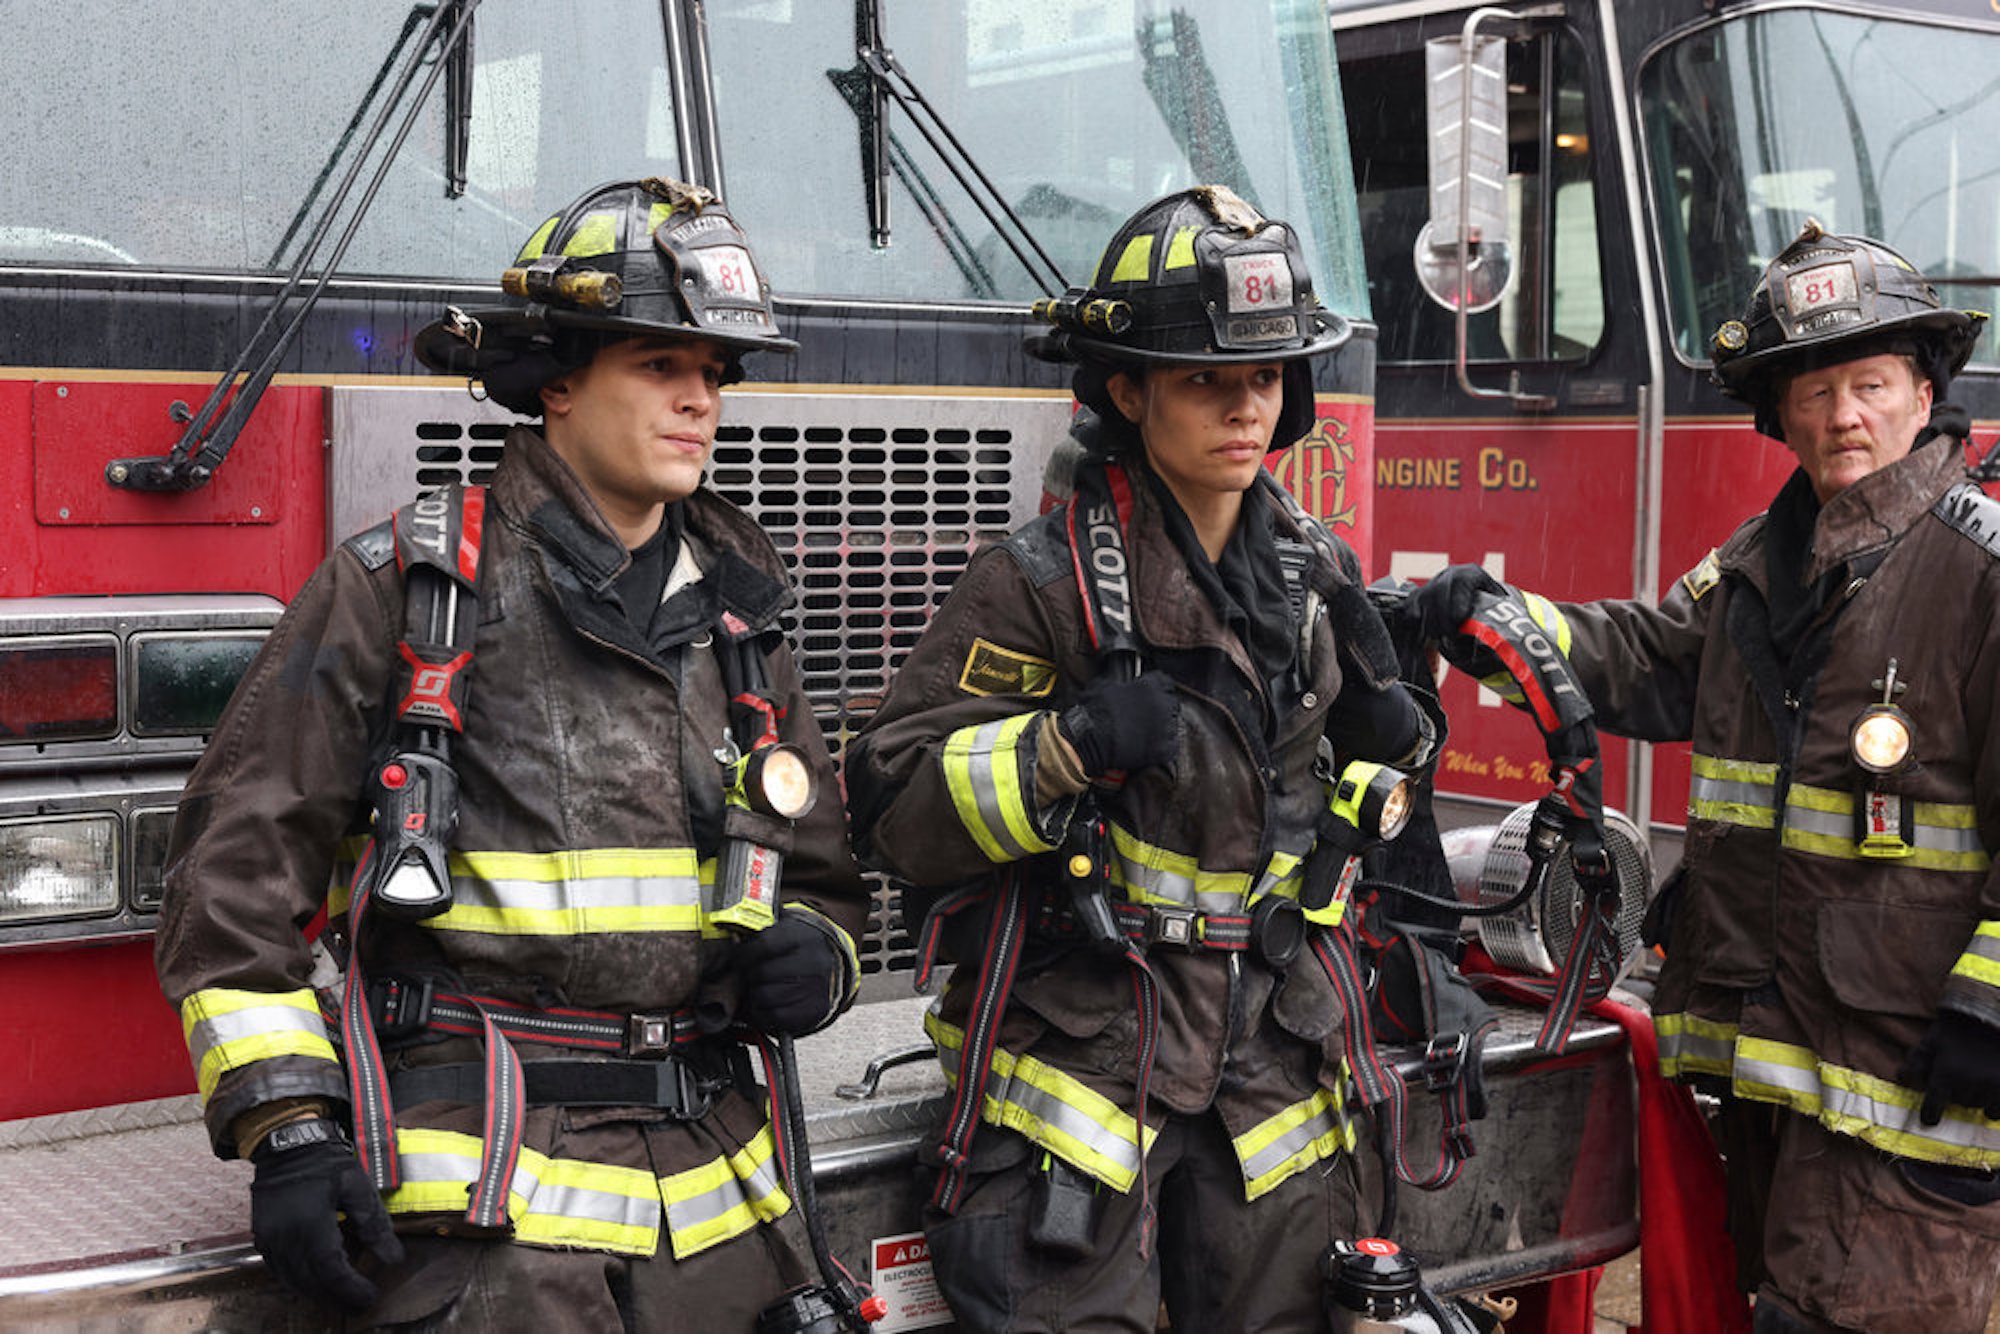 Blake Gallo, Stella Kidd, and Mouch in firefighting gear in 'Chicago P.D.' Season 10 Episode 10